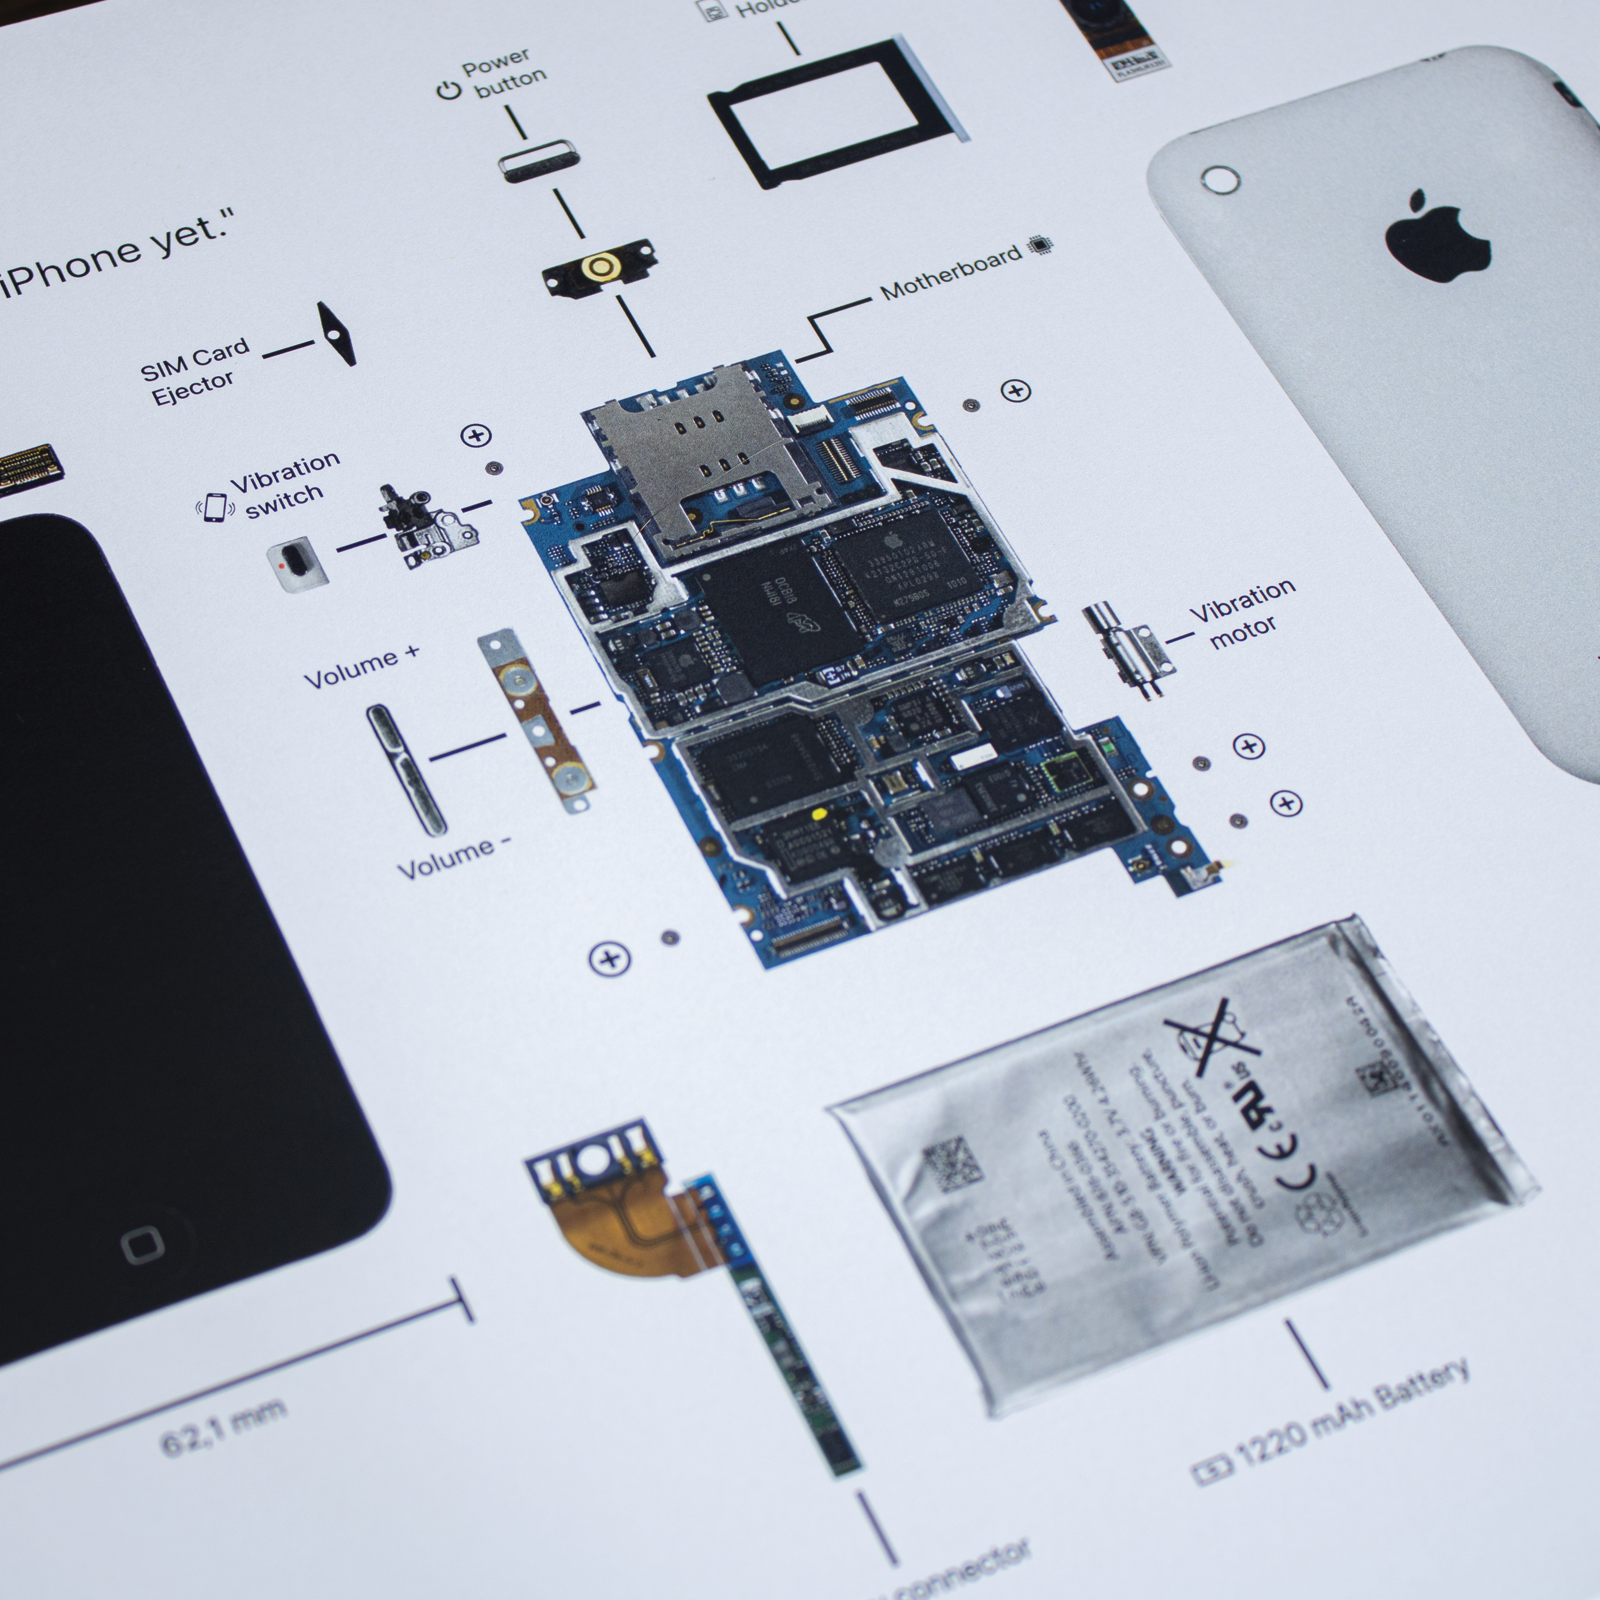 Picture frame of the iPhone 3GS parts